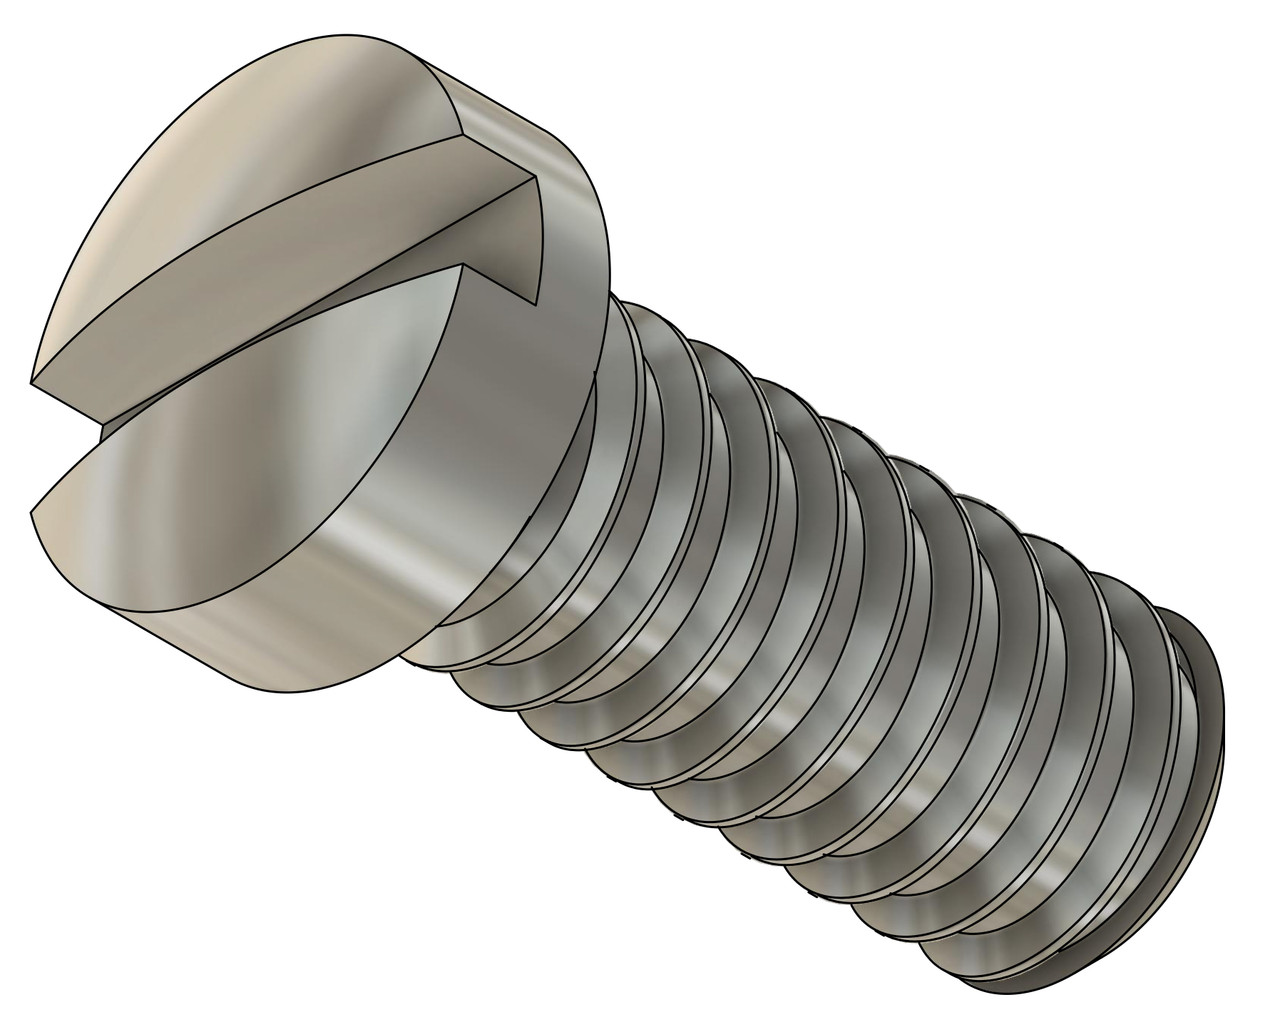 Machine Screw Special, Small Head  Thread M1.4 (1.40UNM,) Pitch .30mm, Overall Length (OAL) 4.0mm, Threaded Length (Shank) 3.2mm / 1/8" max, Head 2.0mm

 Stainless Steel, Finish Color Silver  Made on precision screw machines.  Price is for 100 count package with bulk pricing available.

 Please contact us for bulk pricing pricing or any additional questions or information.